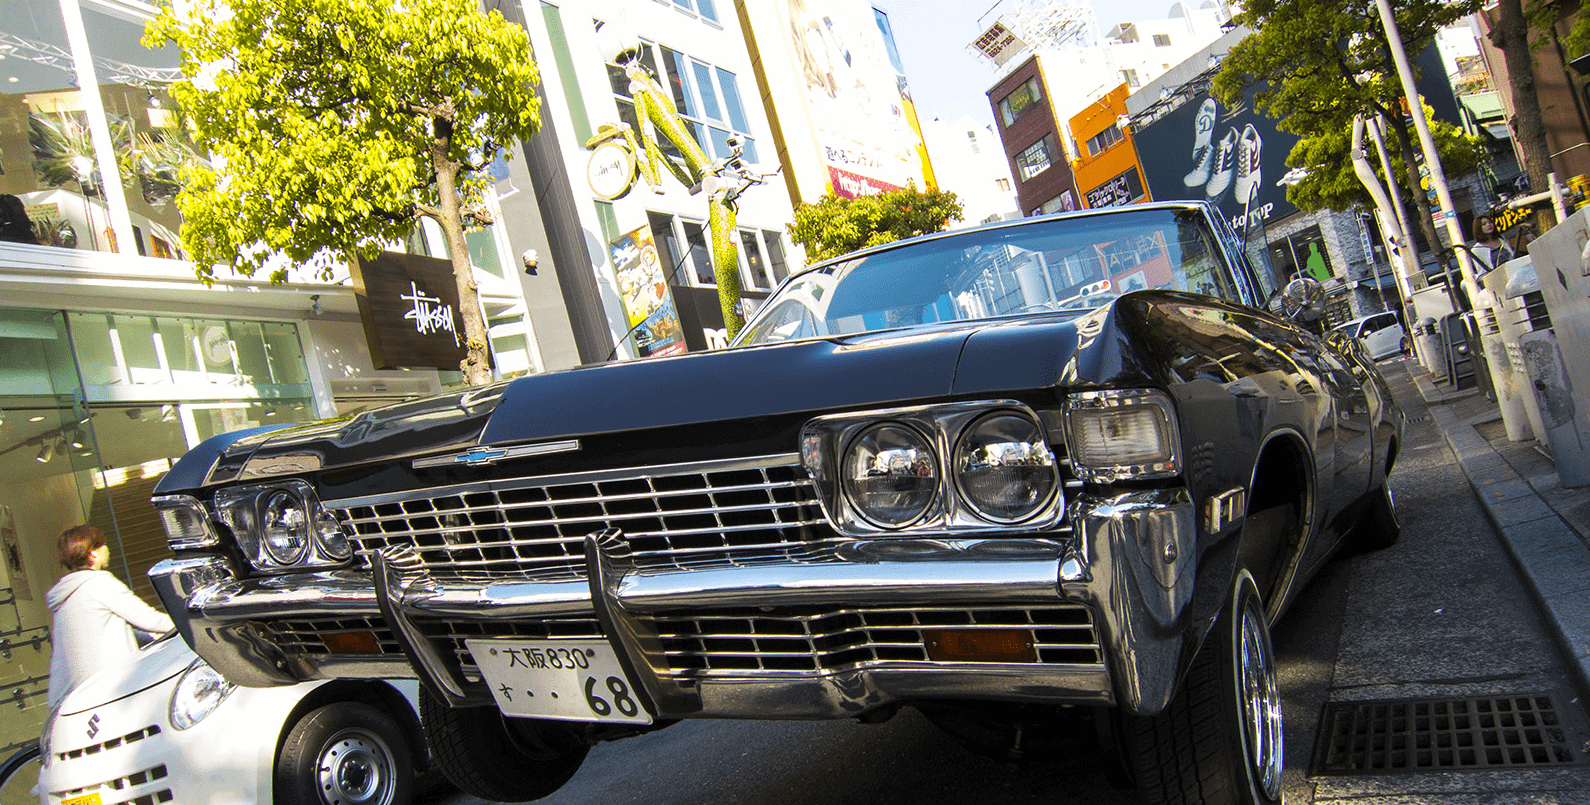 A Look At Japanese Cholo Culture From Lowriders To Rappers